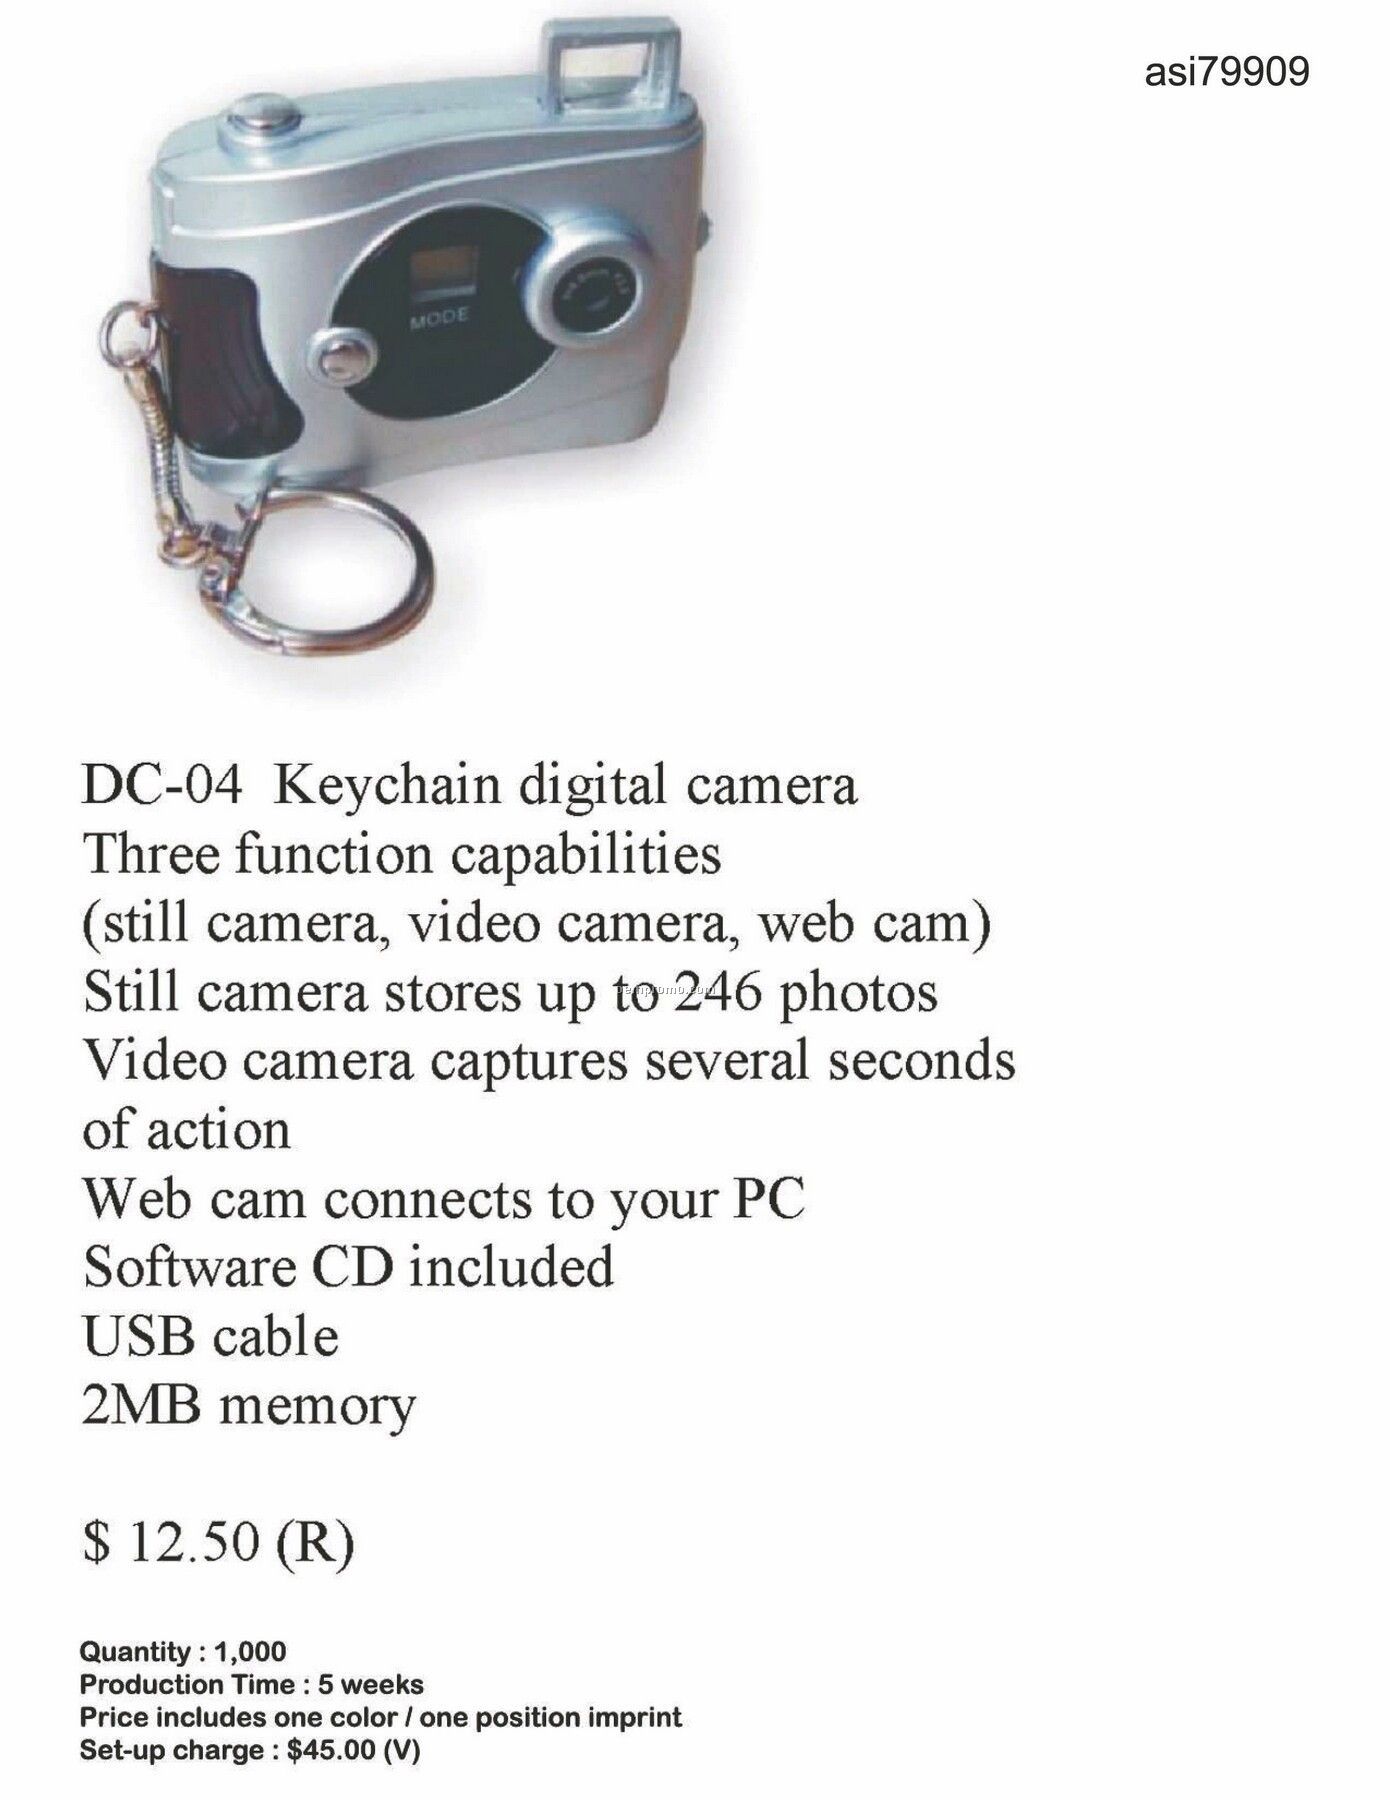 Keychain Digital Camera With 2mb Memory